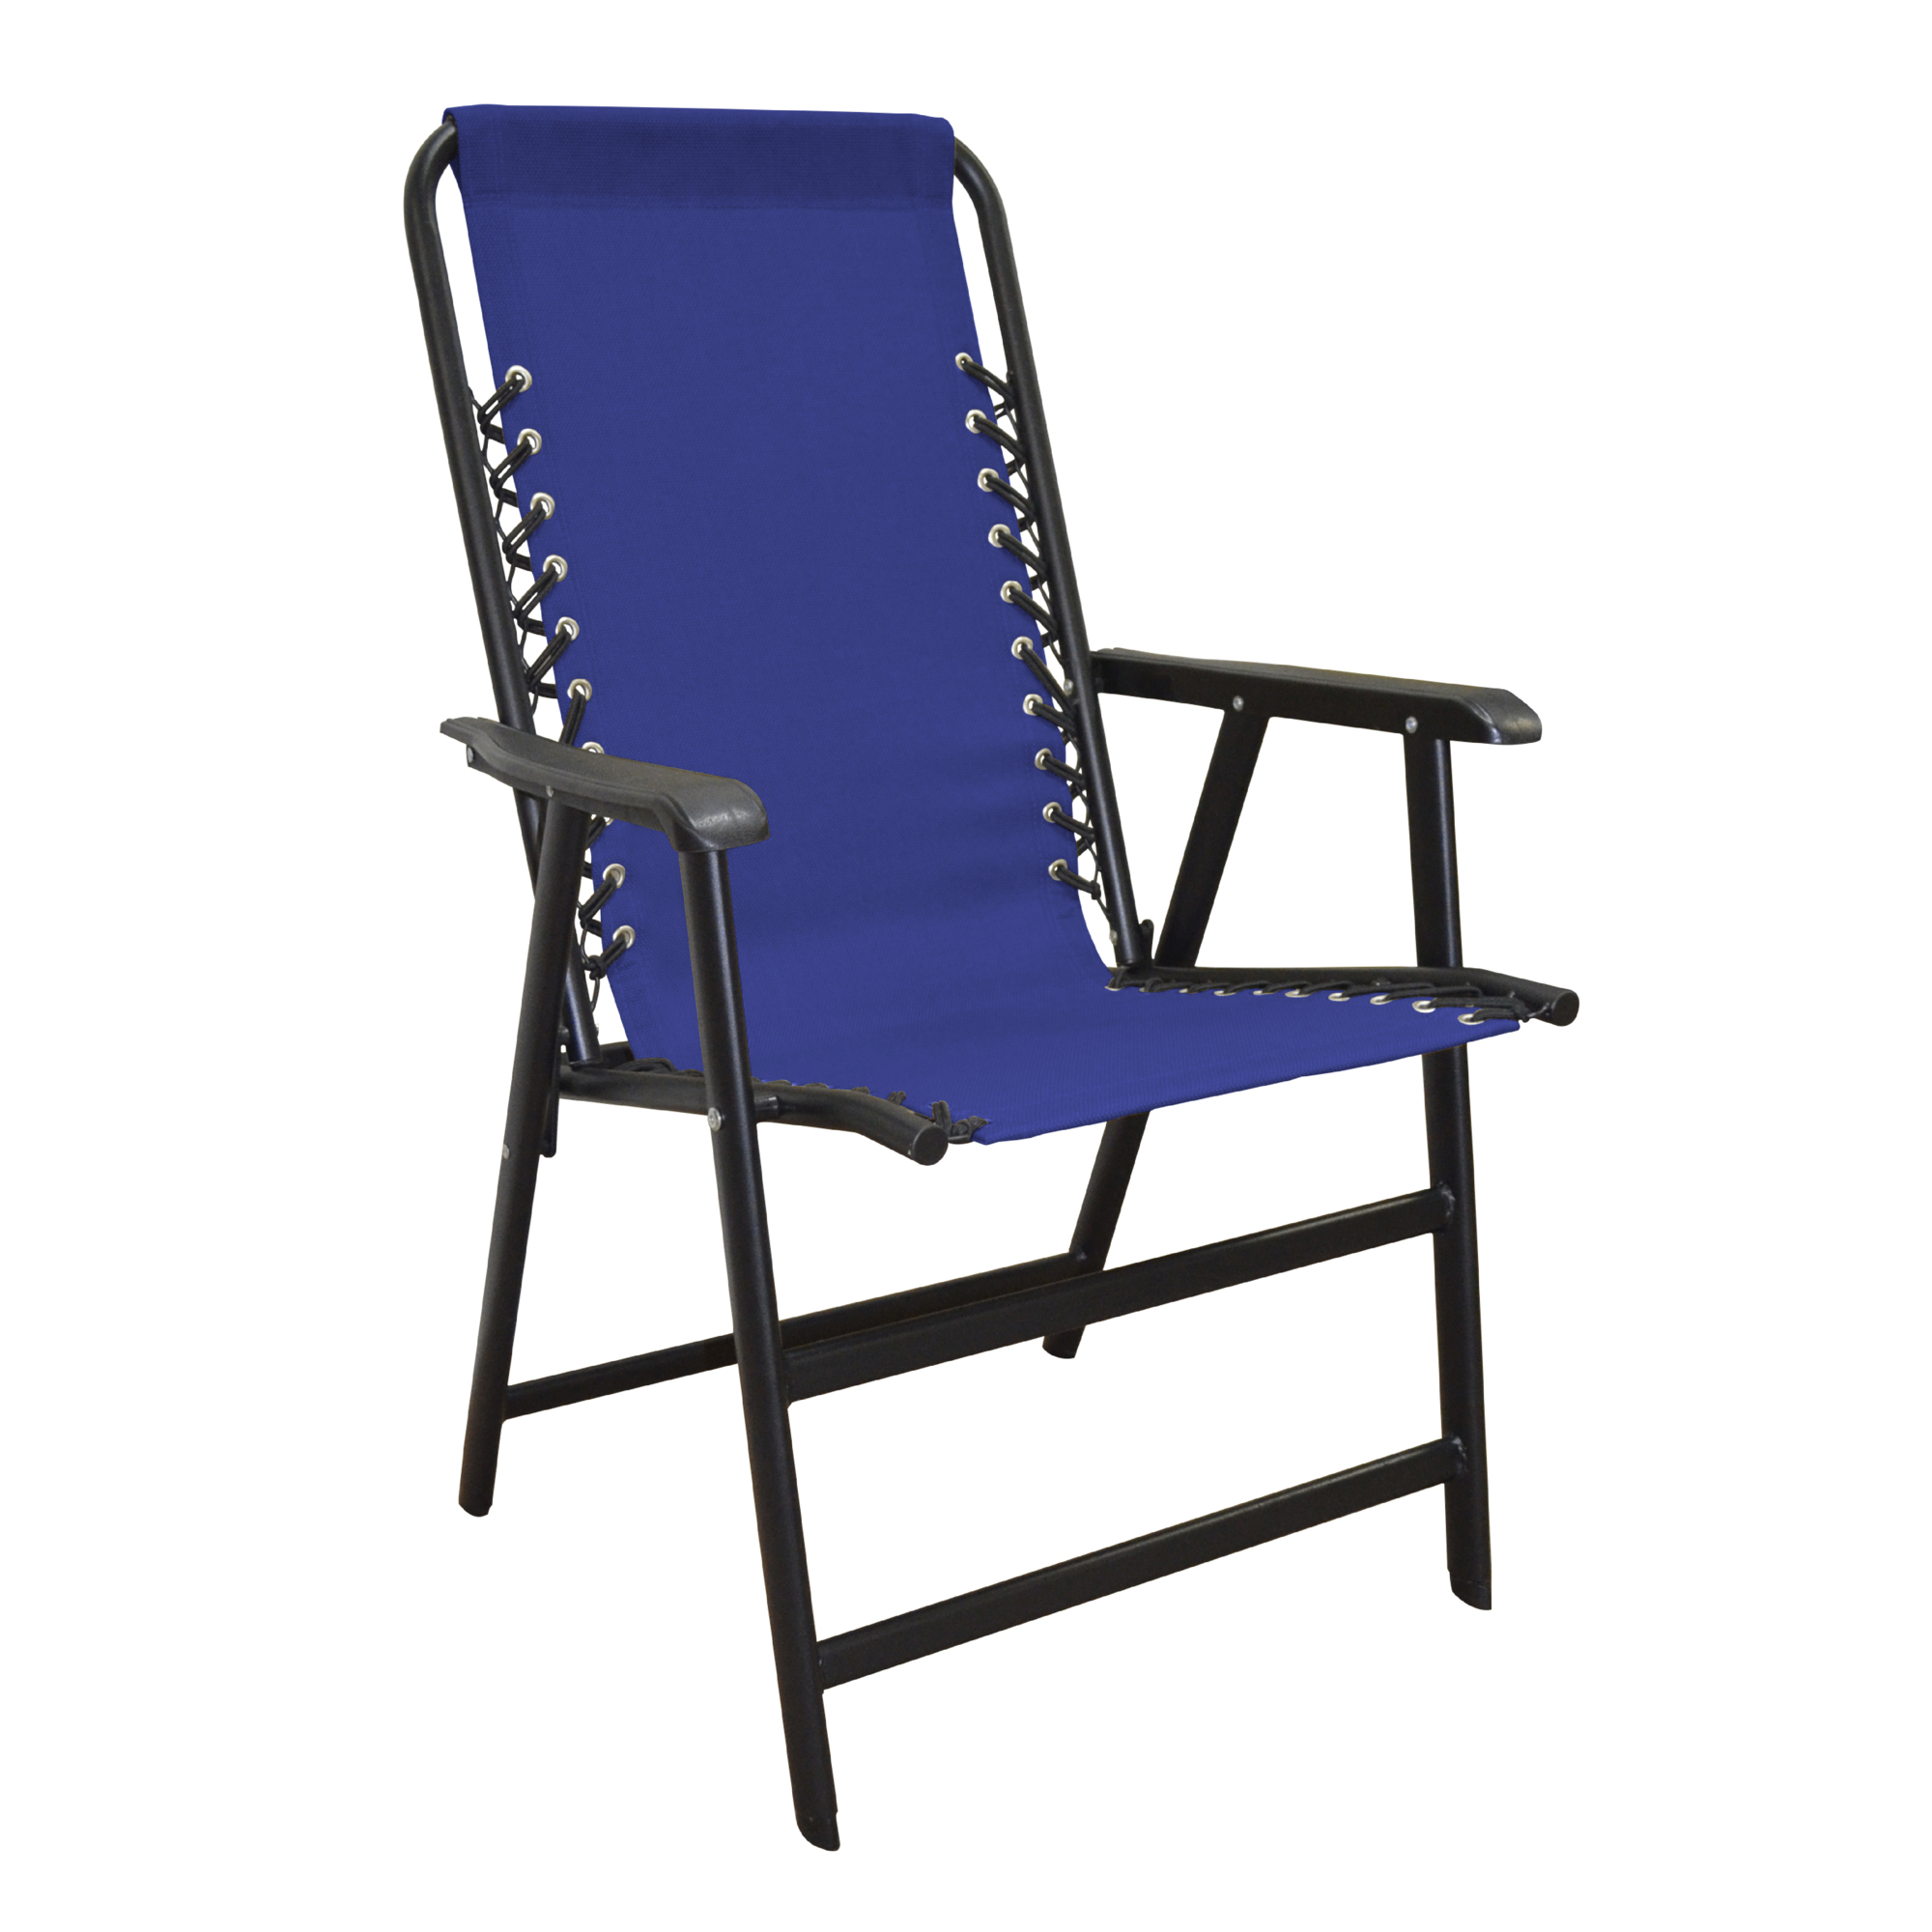 Caravan Canopy, Infinity Suspension Folding Chair, Primary Color Blue, Material Textile, Width 23.42 in, Model 80012000020